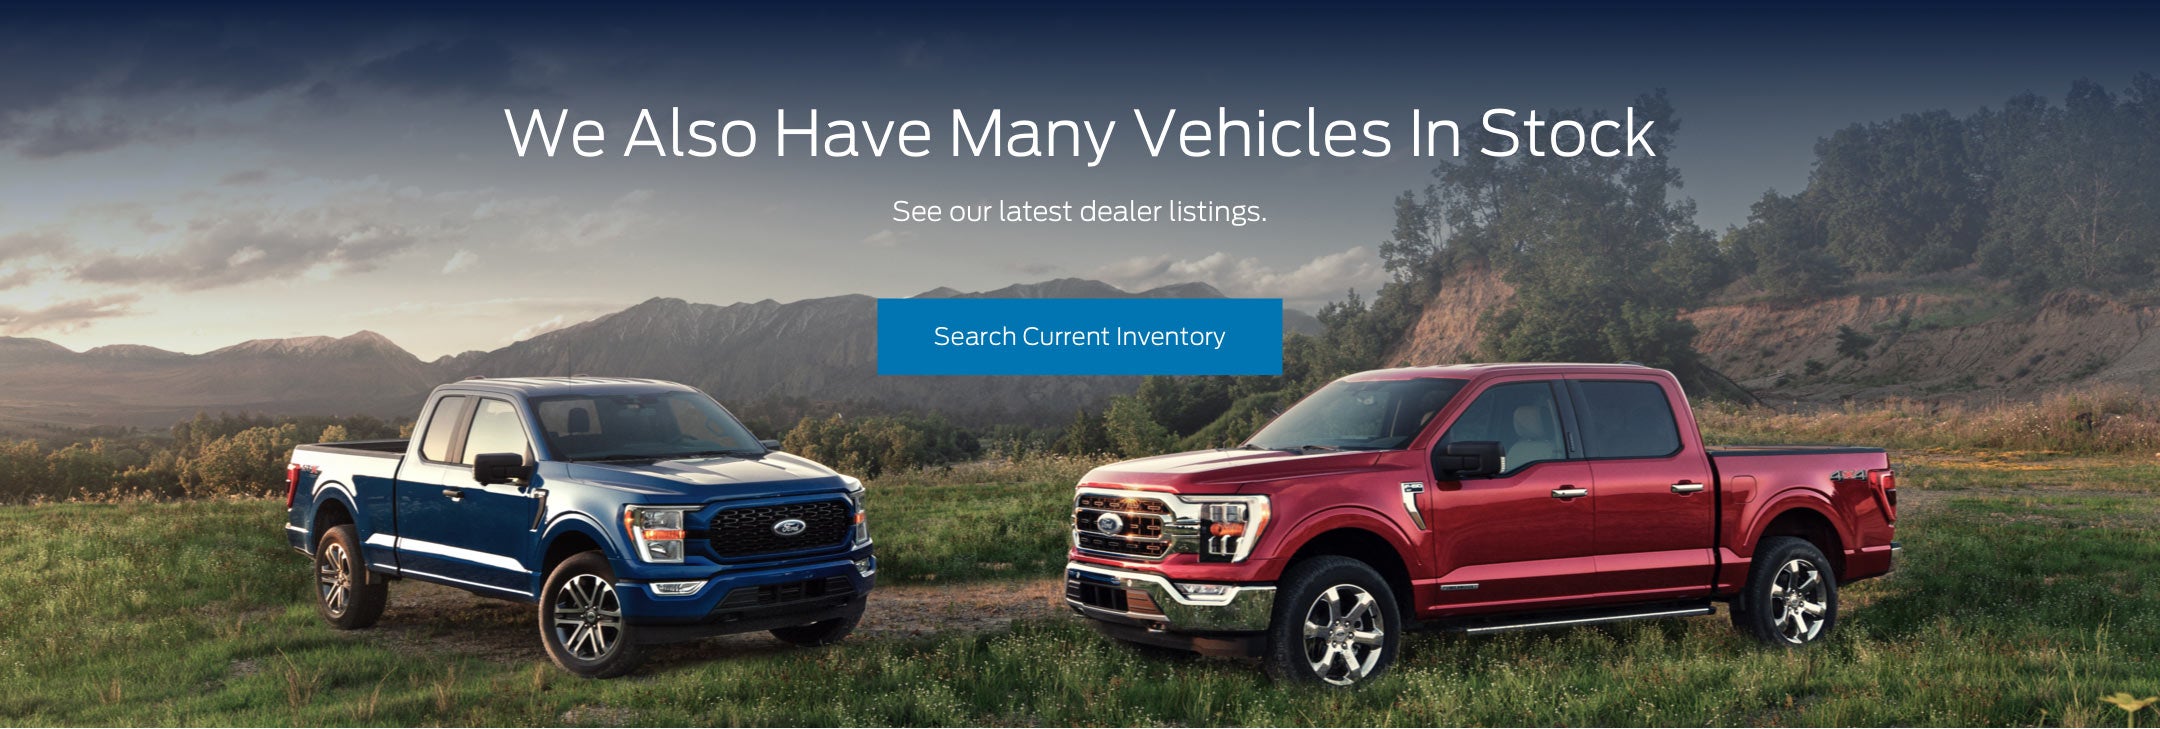 Ford vehicles in stock | Bedford Ford in Bedford PA